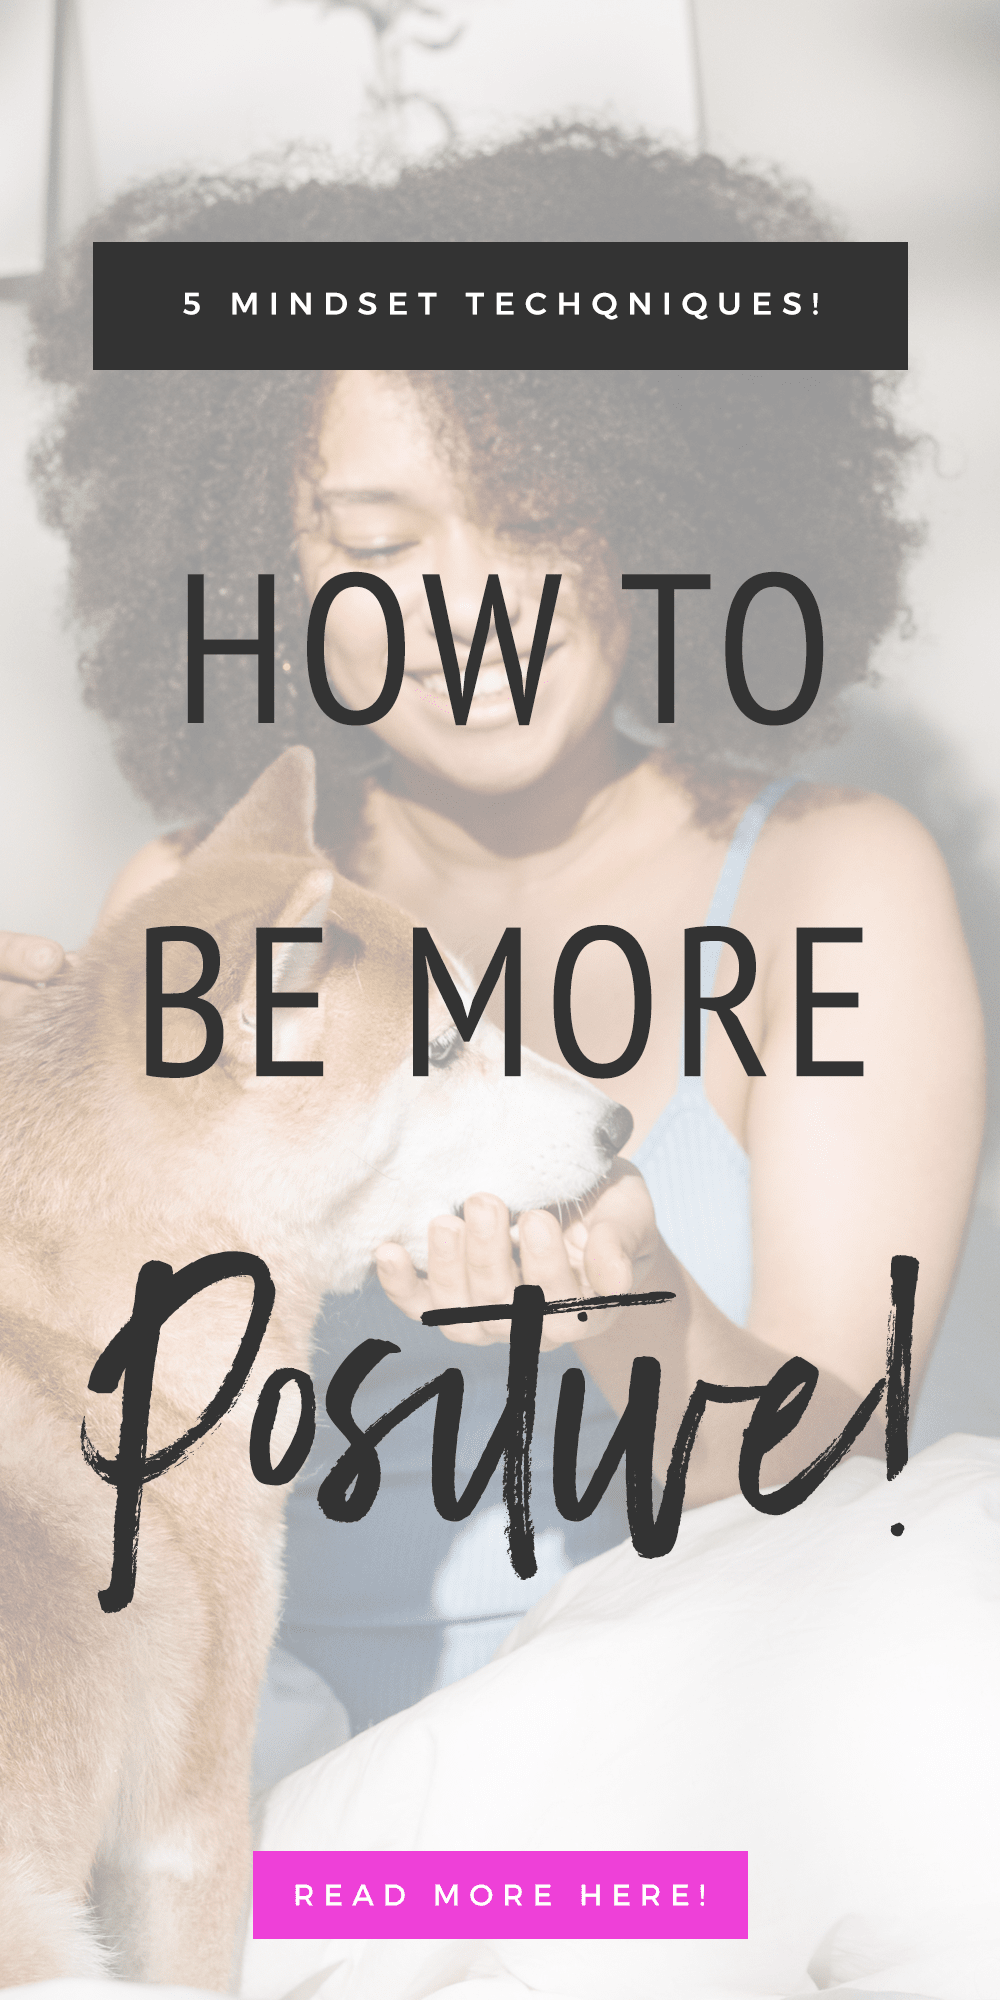 How To Be More Positive: 5 Mindset Techniques